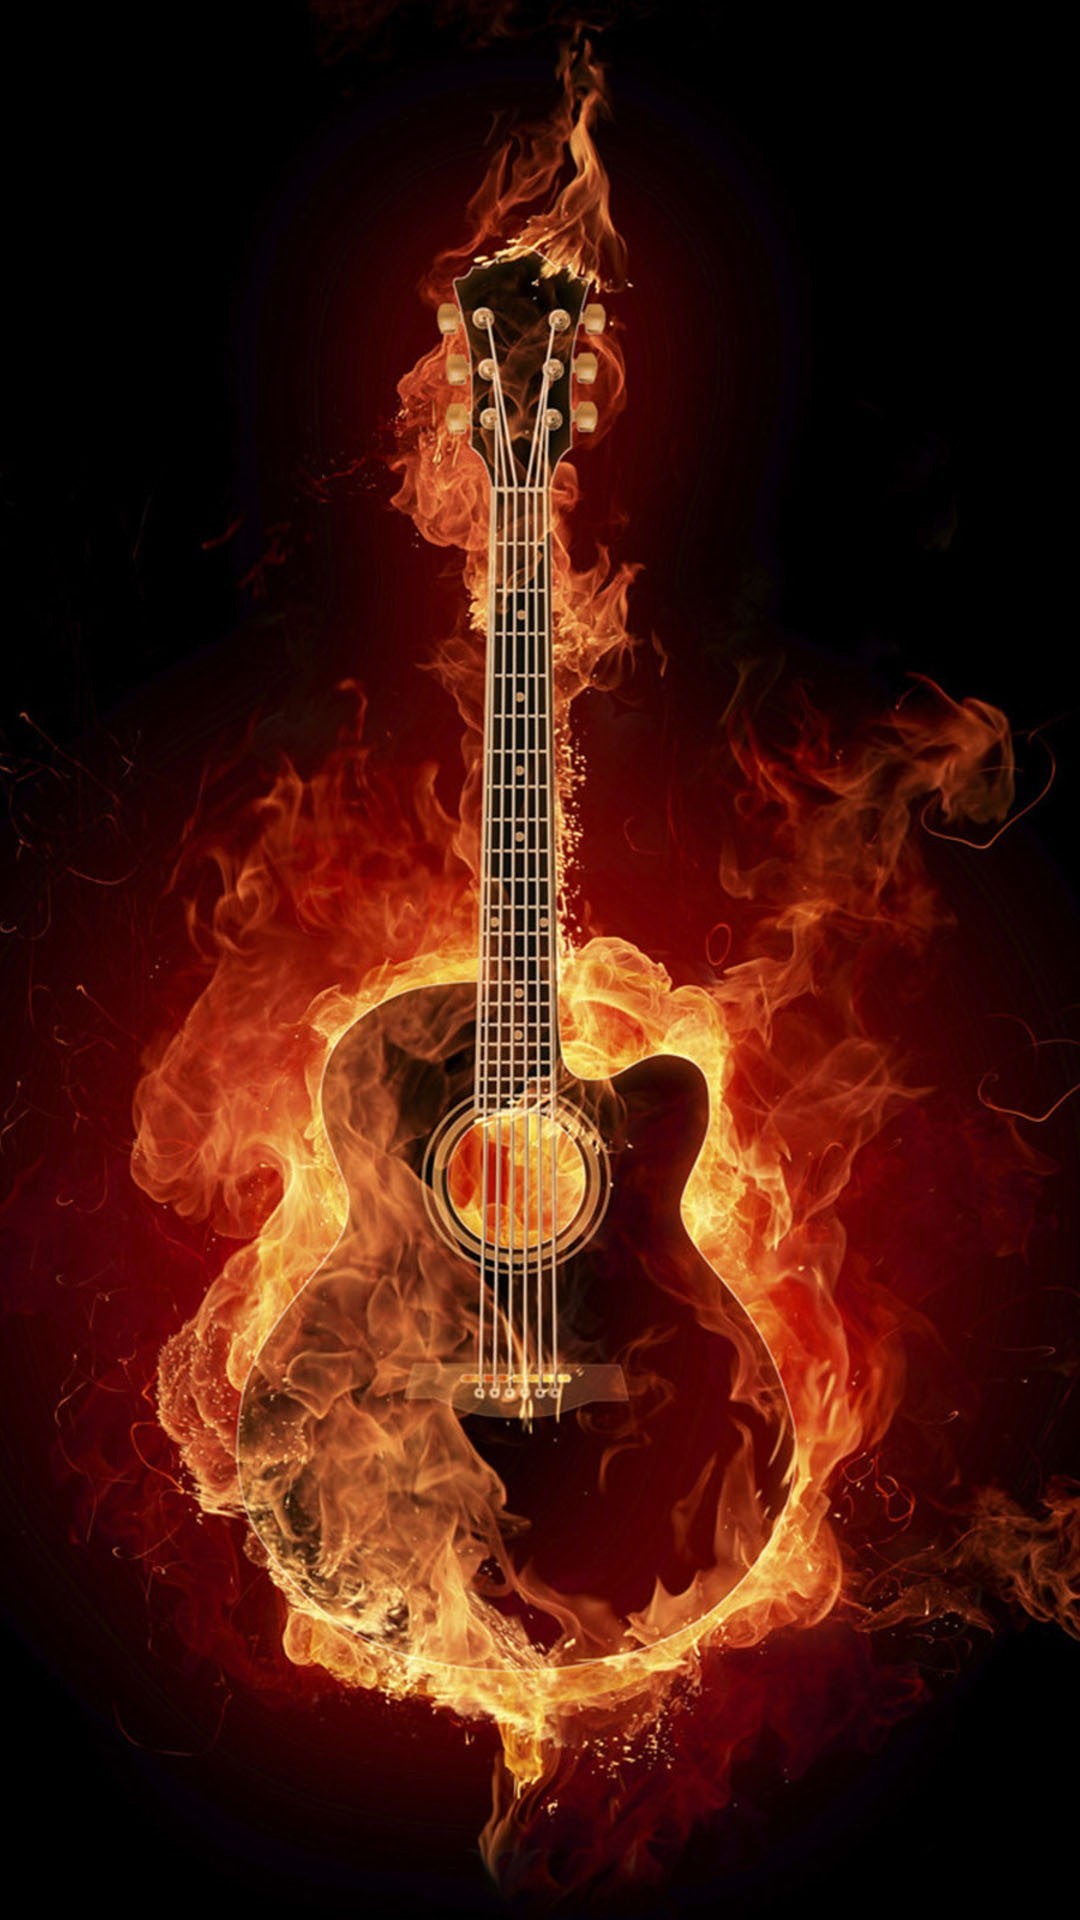 1080x1920 Superb abstract fire guitar wallpaper for Samsung smartphone